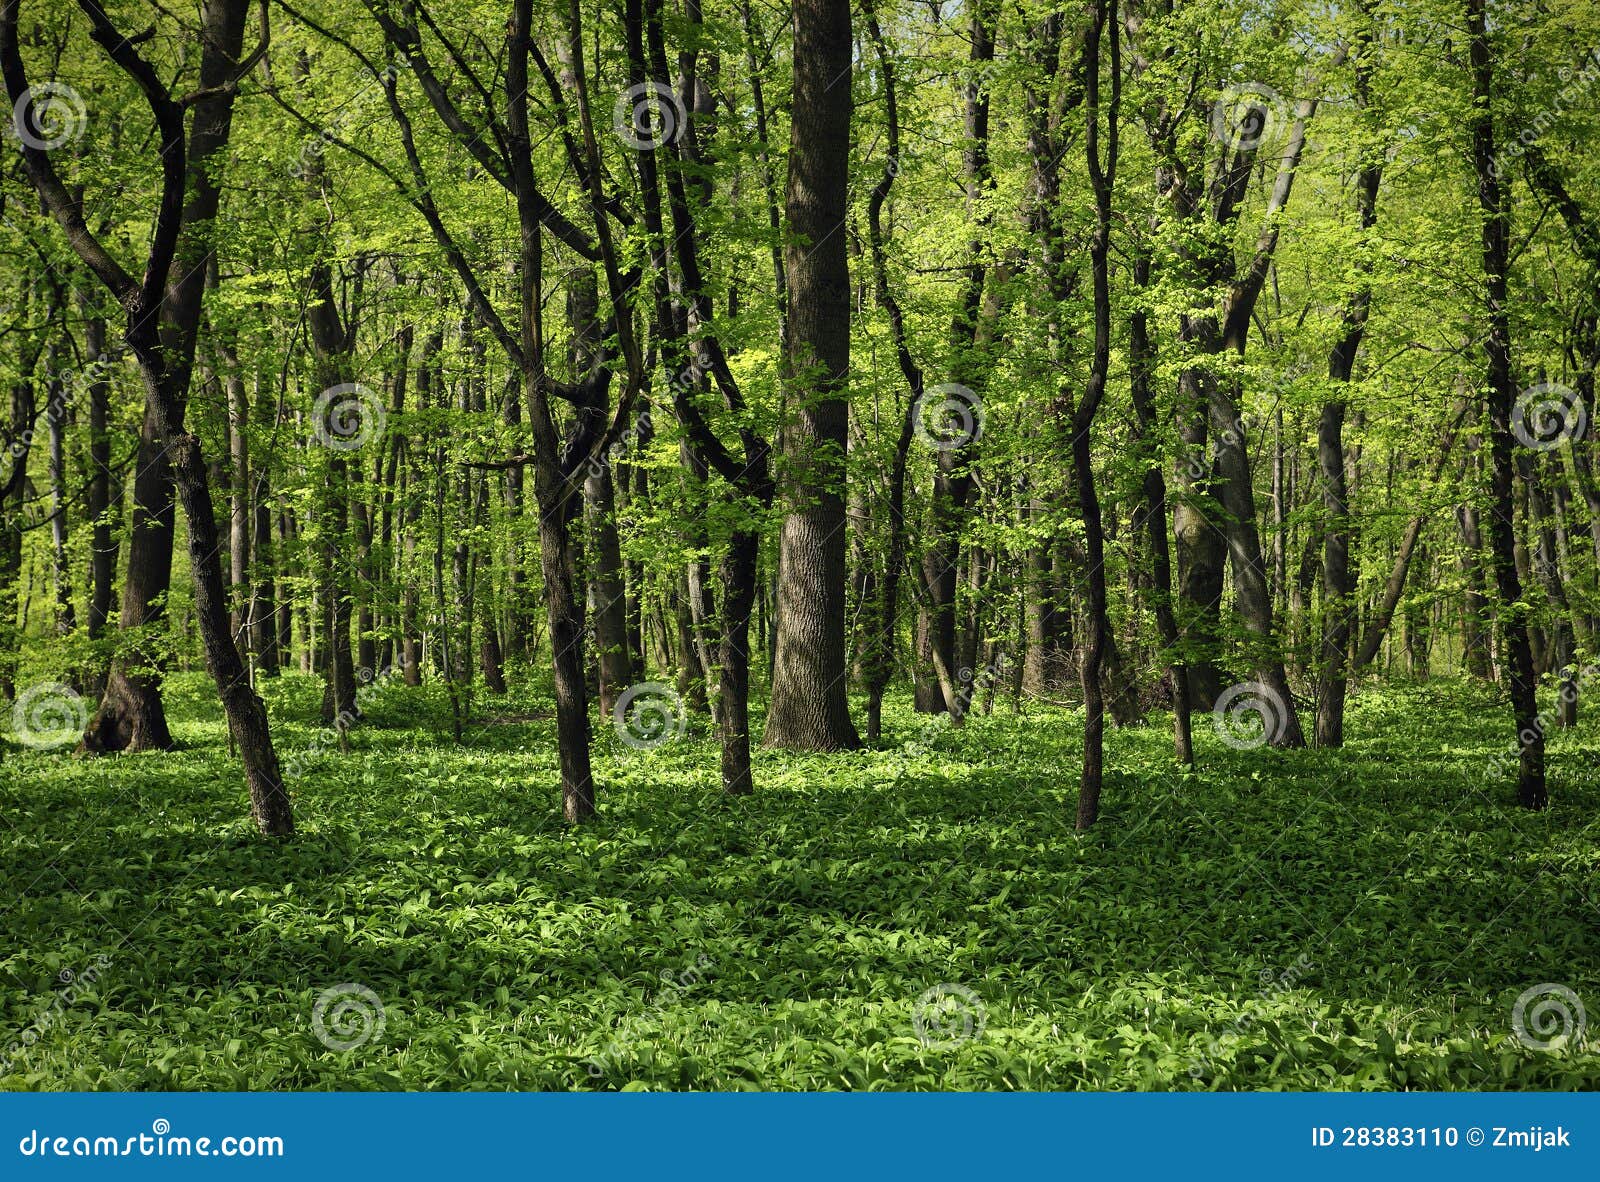 The green forest stock photo. Image of environment, green - 28383110